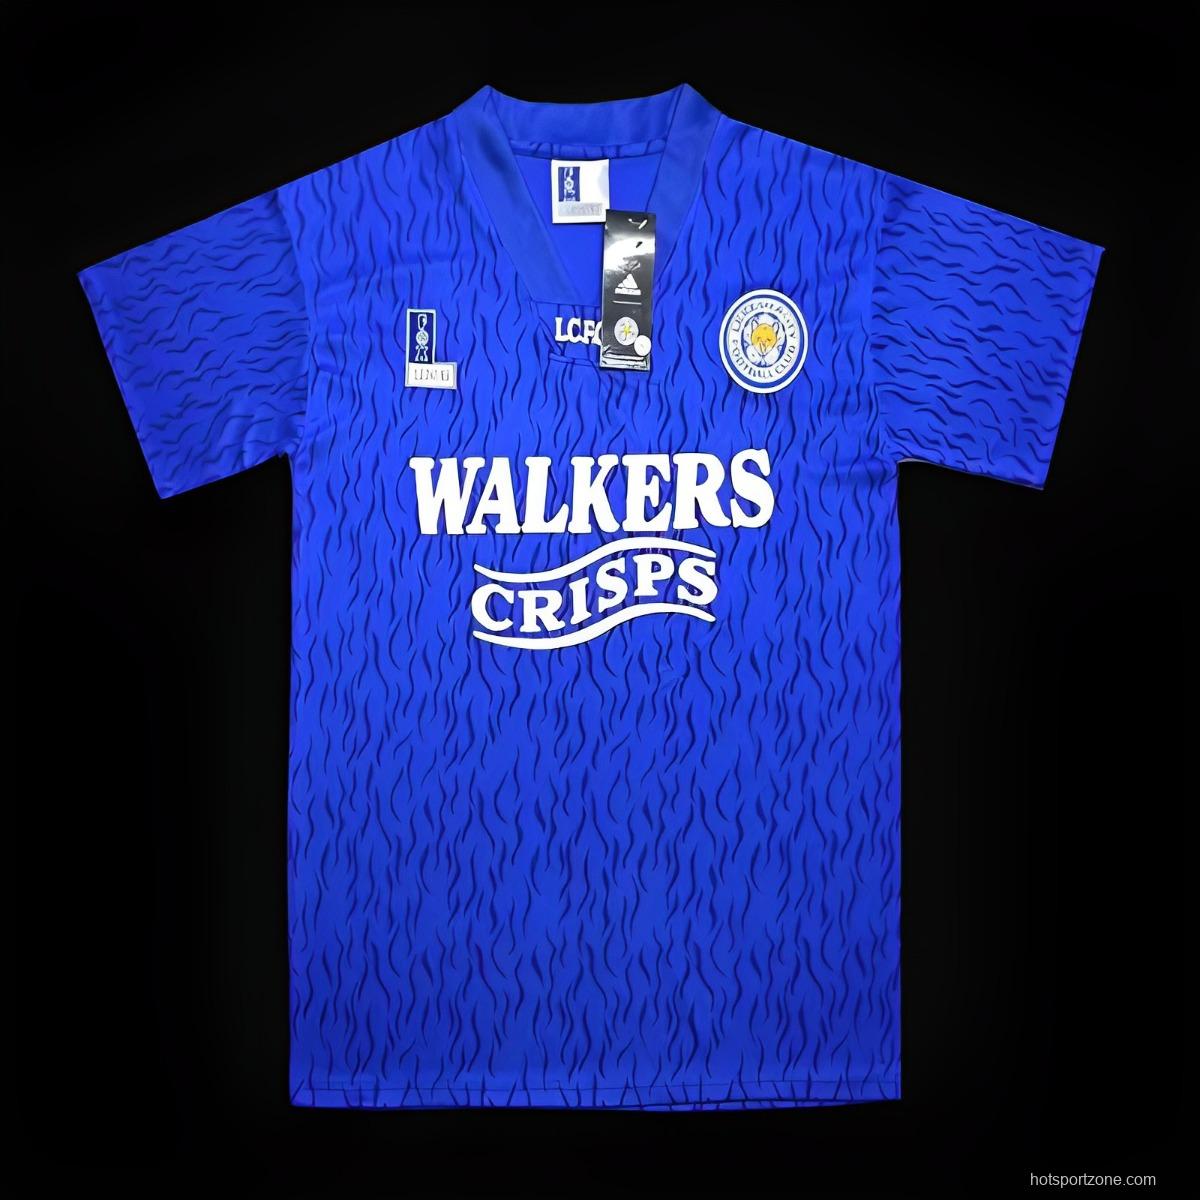 Retro 92/94 Leicester City Home Jersey